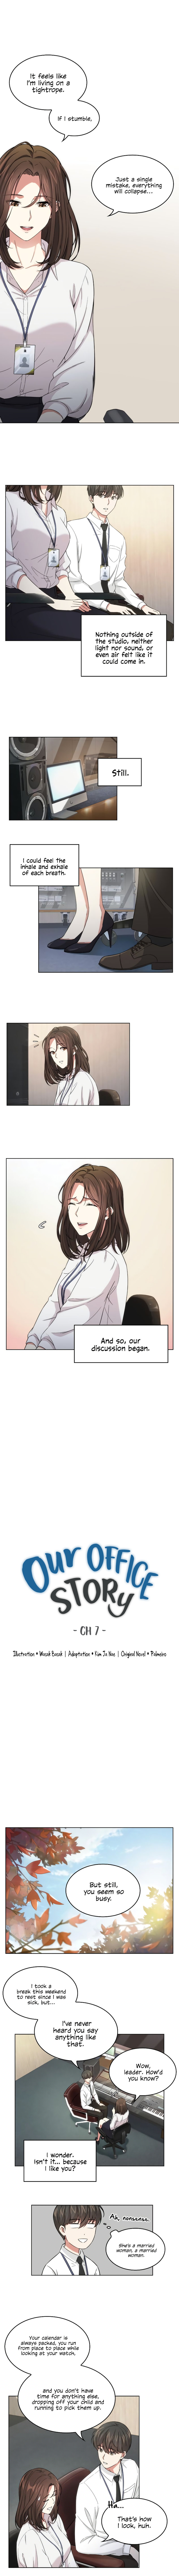 My Office Noona’s Story - Chapter 7 Page 3